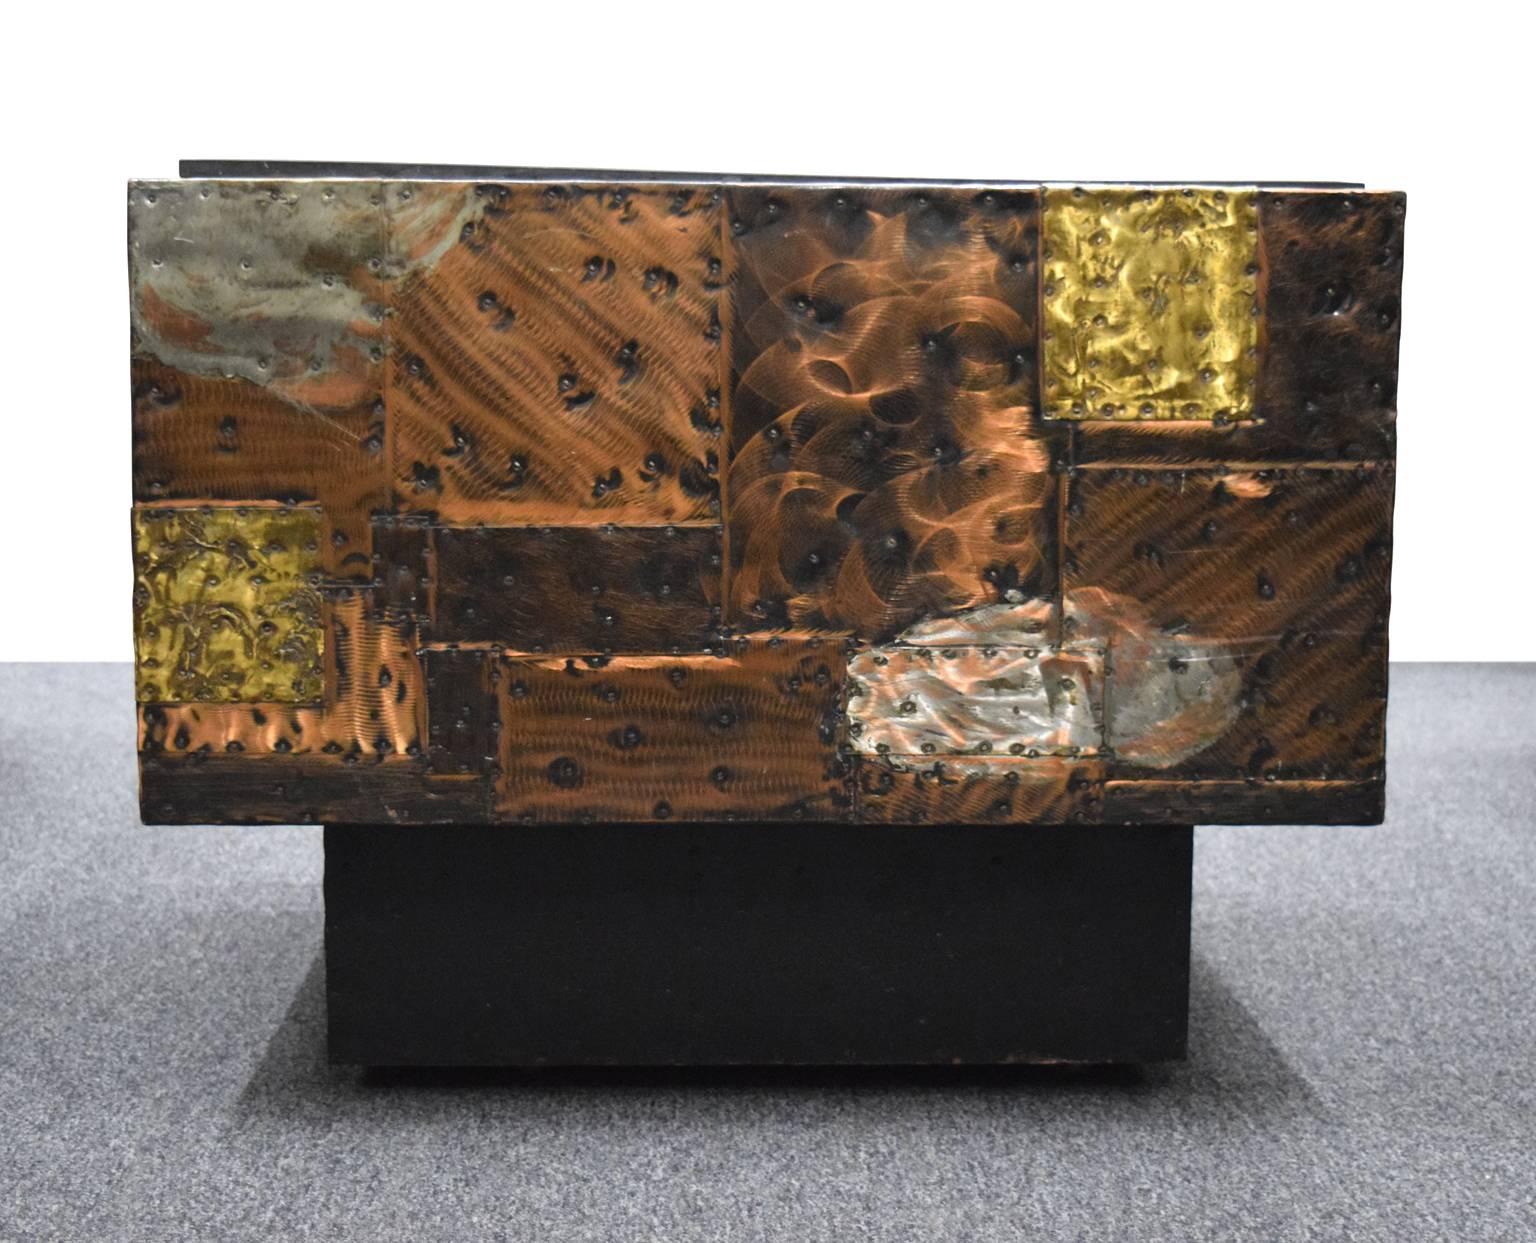 Listed here is a cube table, with a slate top and a patchwork of bronze, copper and pewter around the sides. It was built with hidden casters for greater mobility.